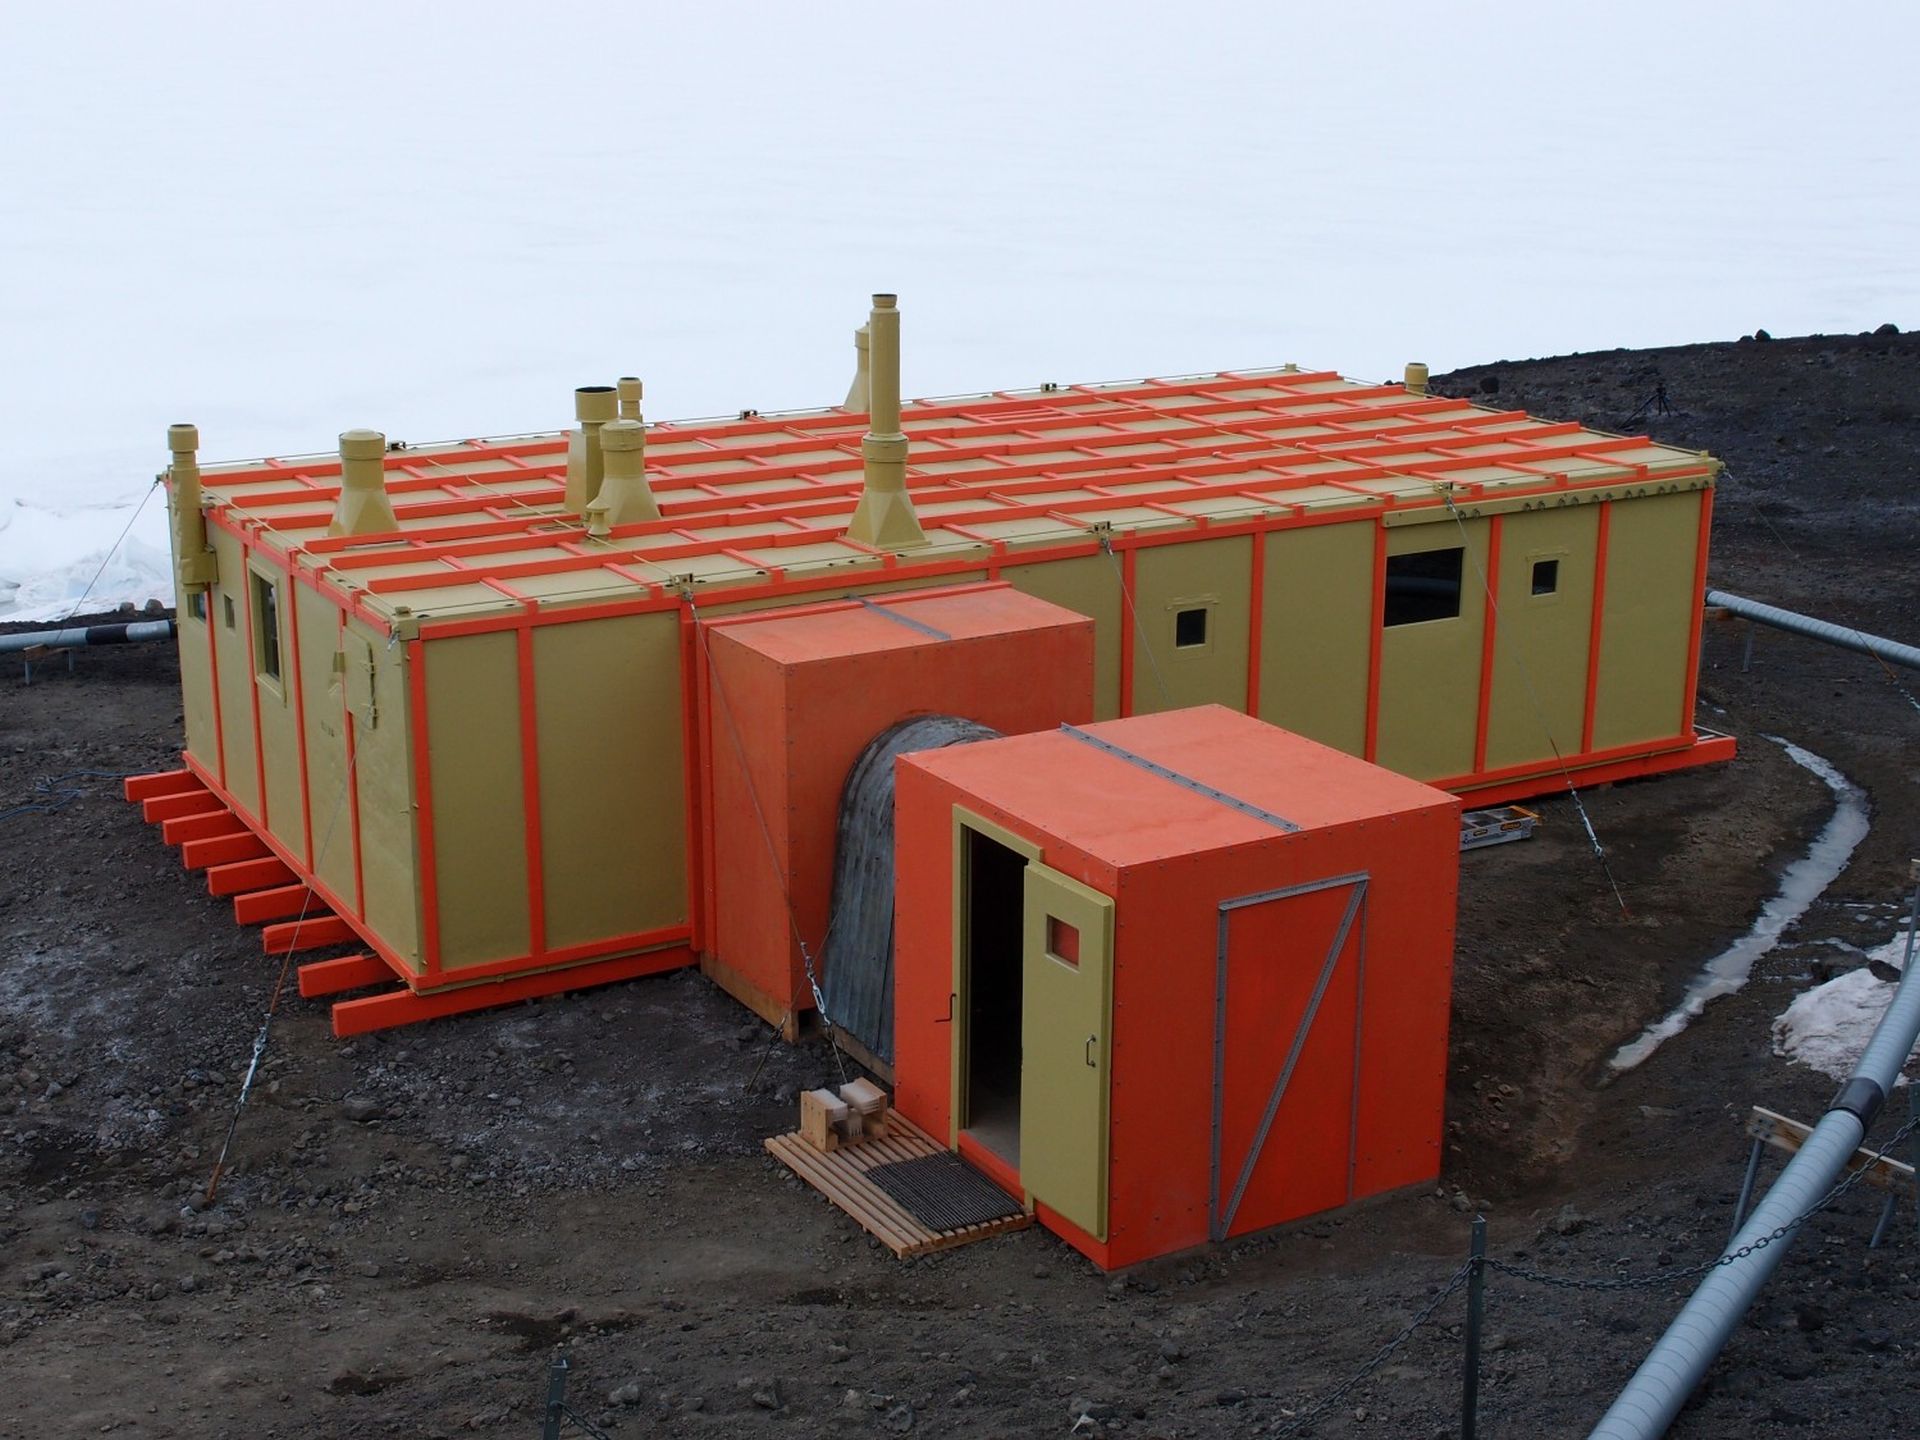 Hillary's Hut featuring its original colours, renamed by the Trust as 'Pram Point (yellow) and 'Sno-cat' (orange).